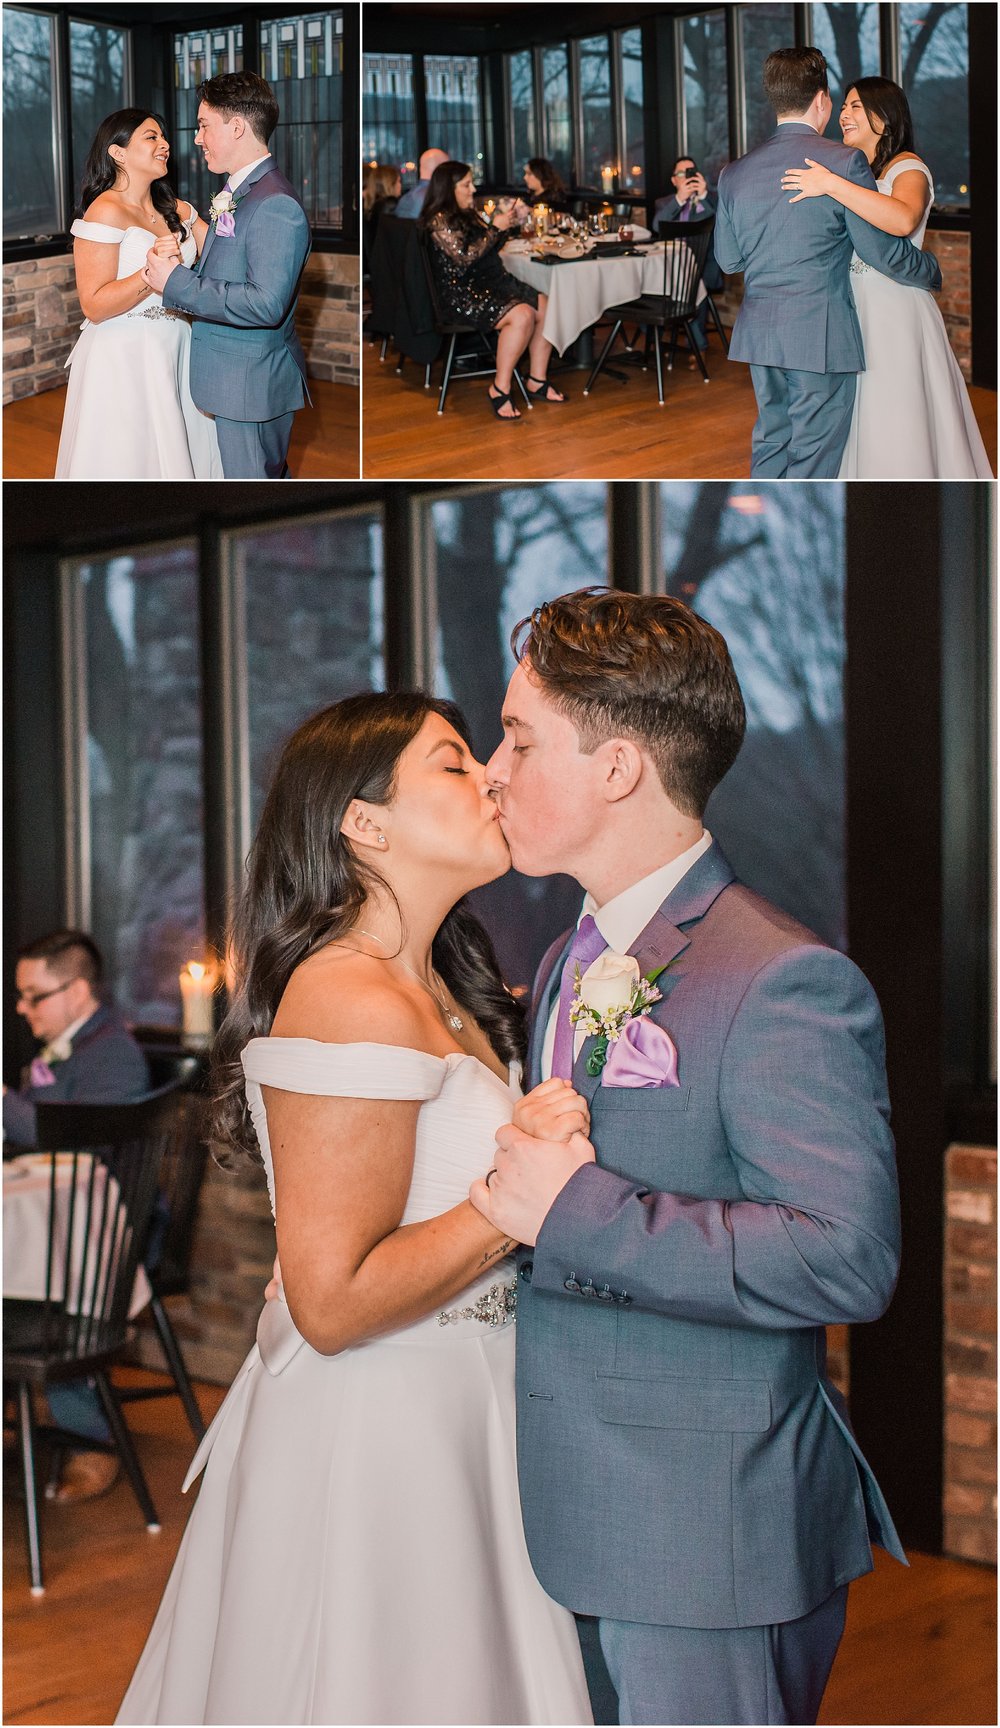 bride and groom sharing their first dance as husband and wife for their intimate wedding ceremony in the mountains of New Jersey, elopement